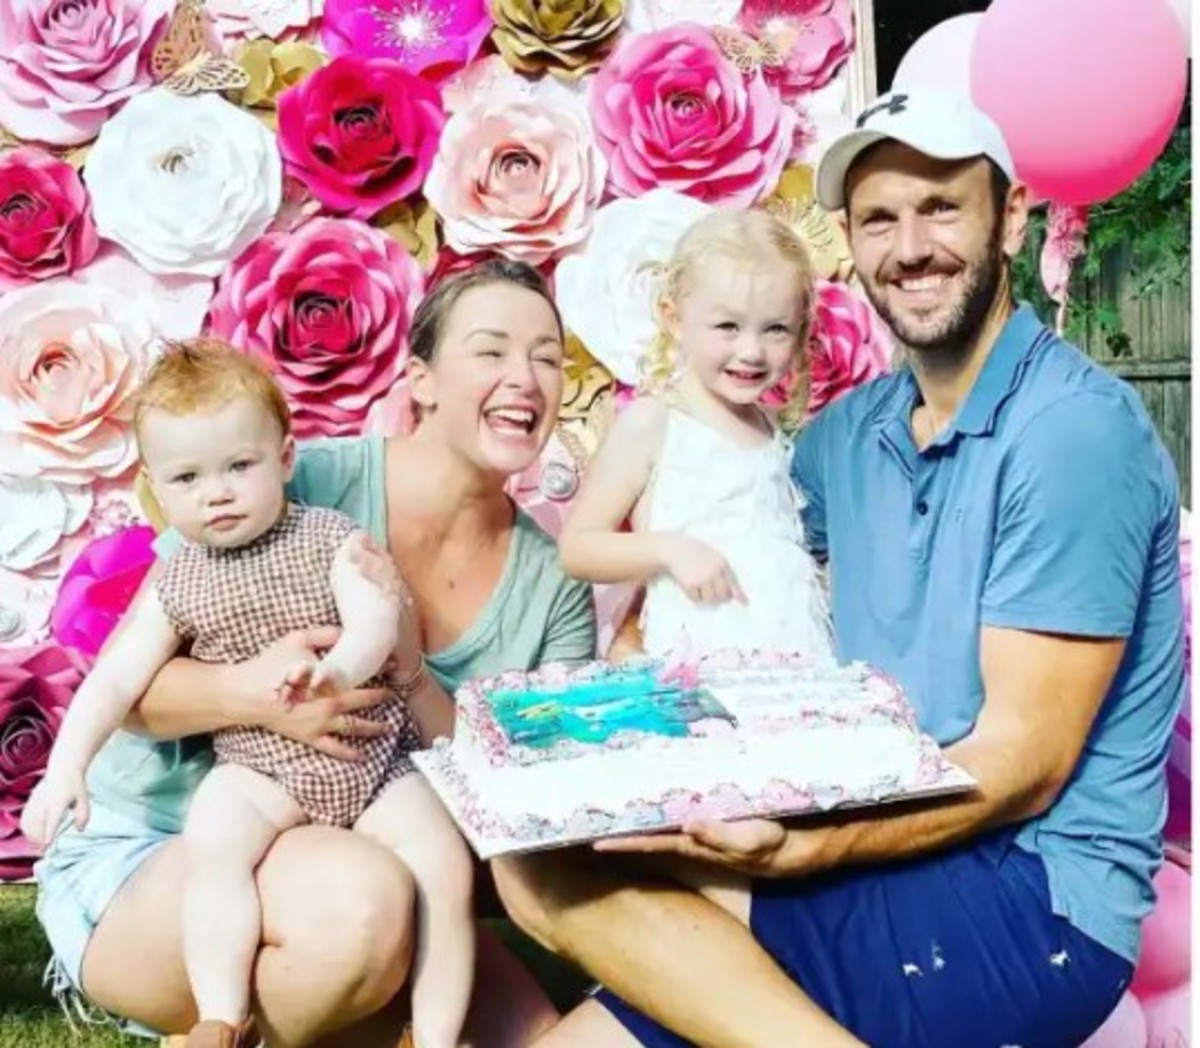 Jamie Otis and Doug Hehner with their daughter and son